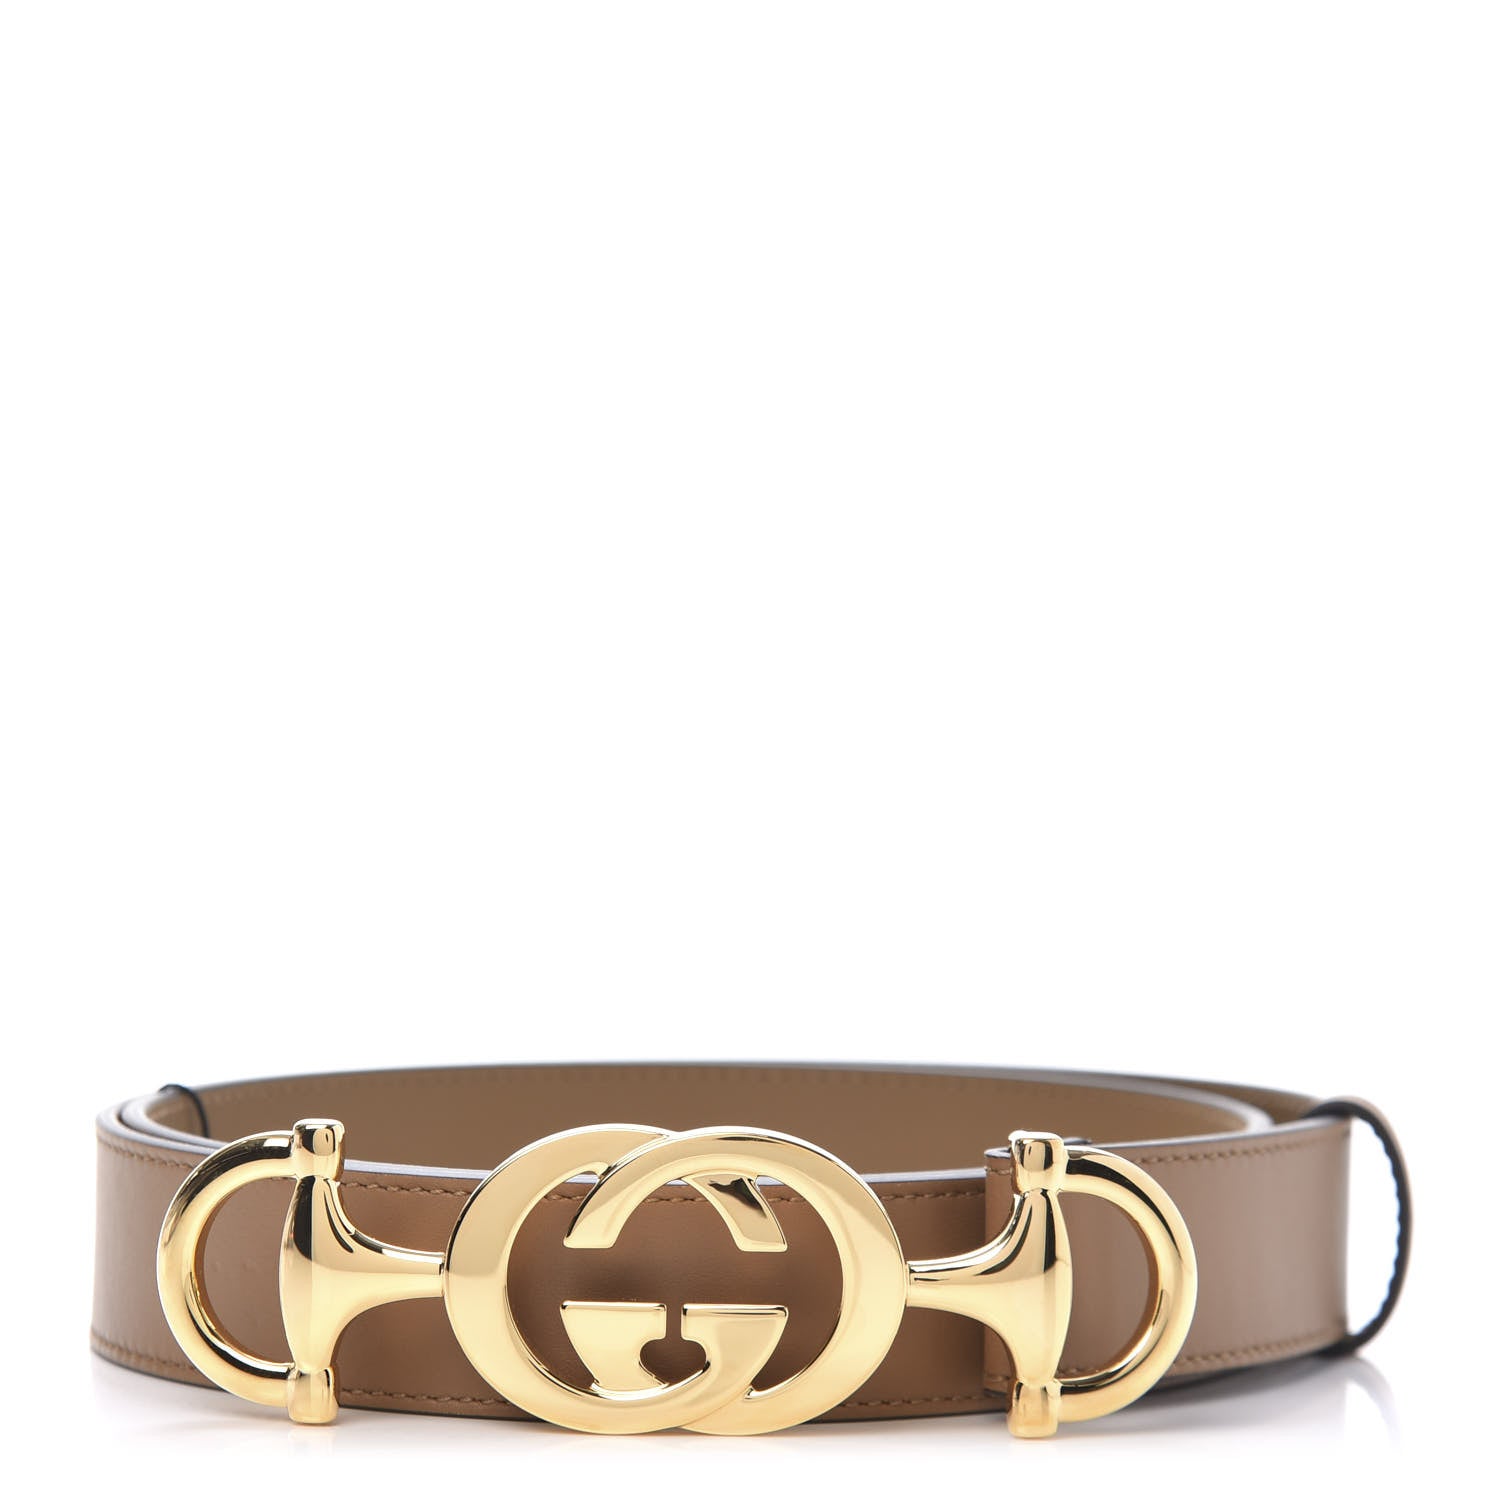 Gucci GG Belt with Horse Bit Buckle